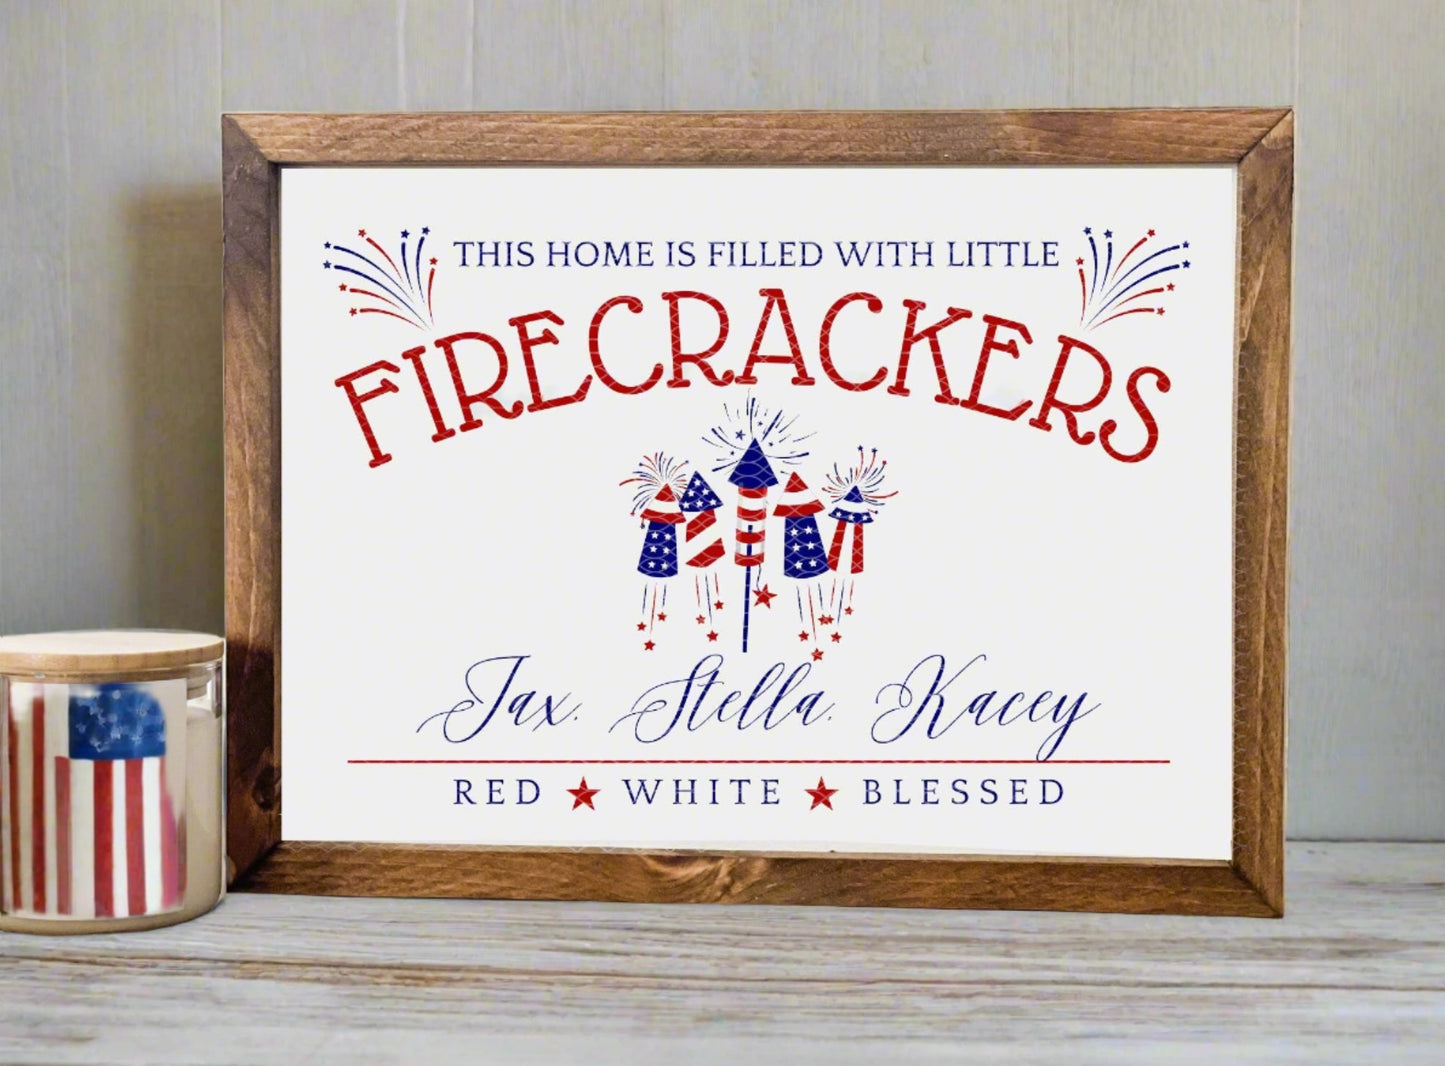 This Home Is Filled With Little Firecrackers Sign